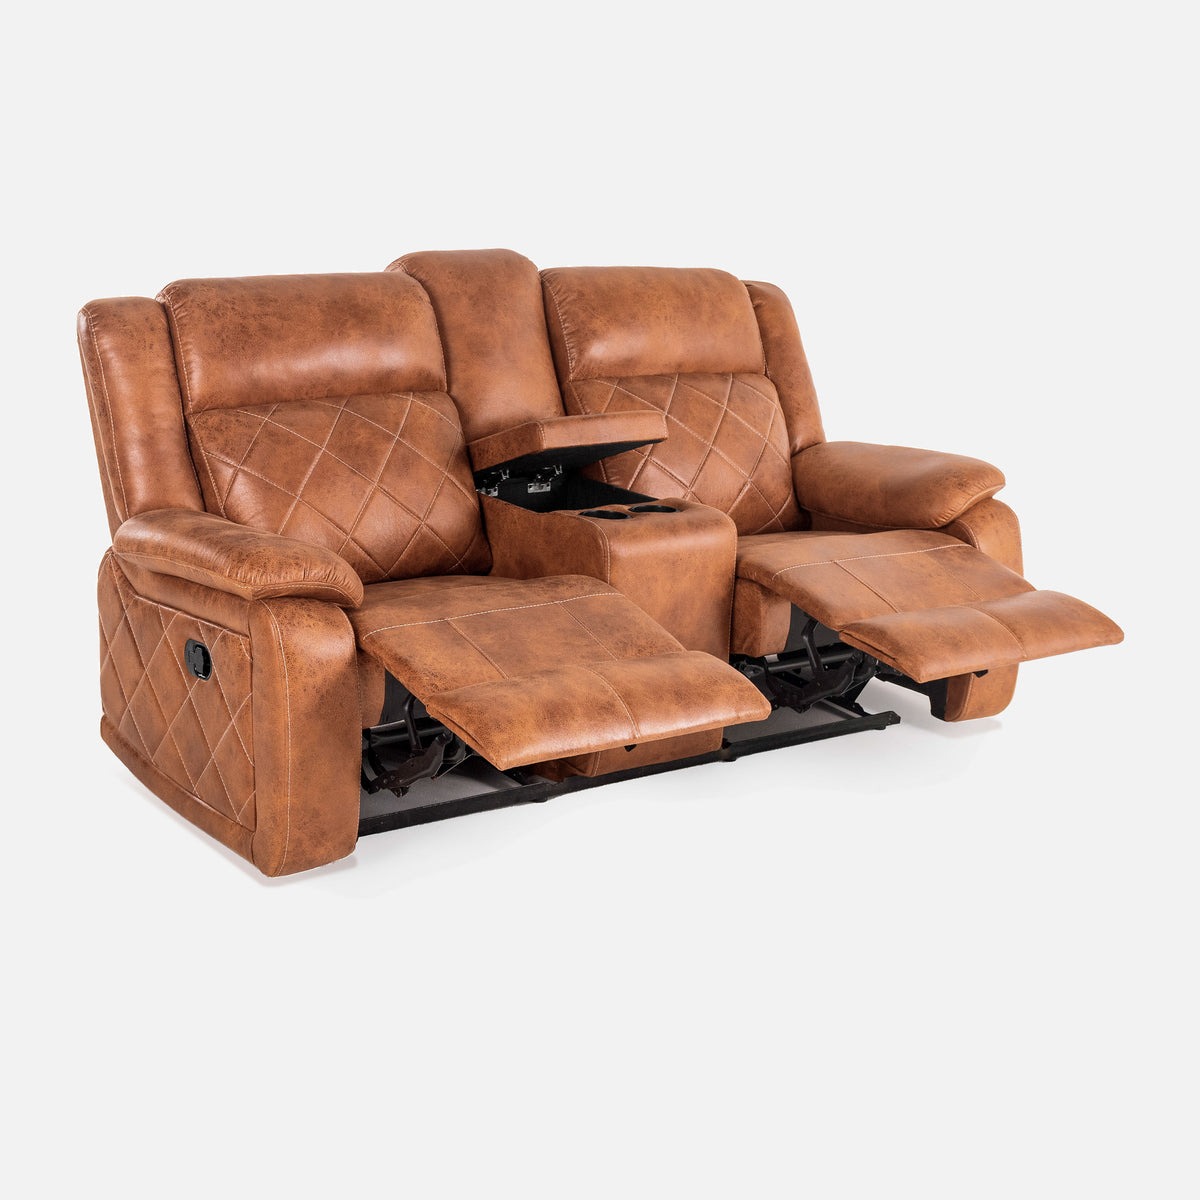 Werfo Marvel 2 Seater Recliner With Console (Tan)